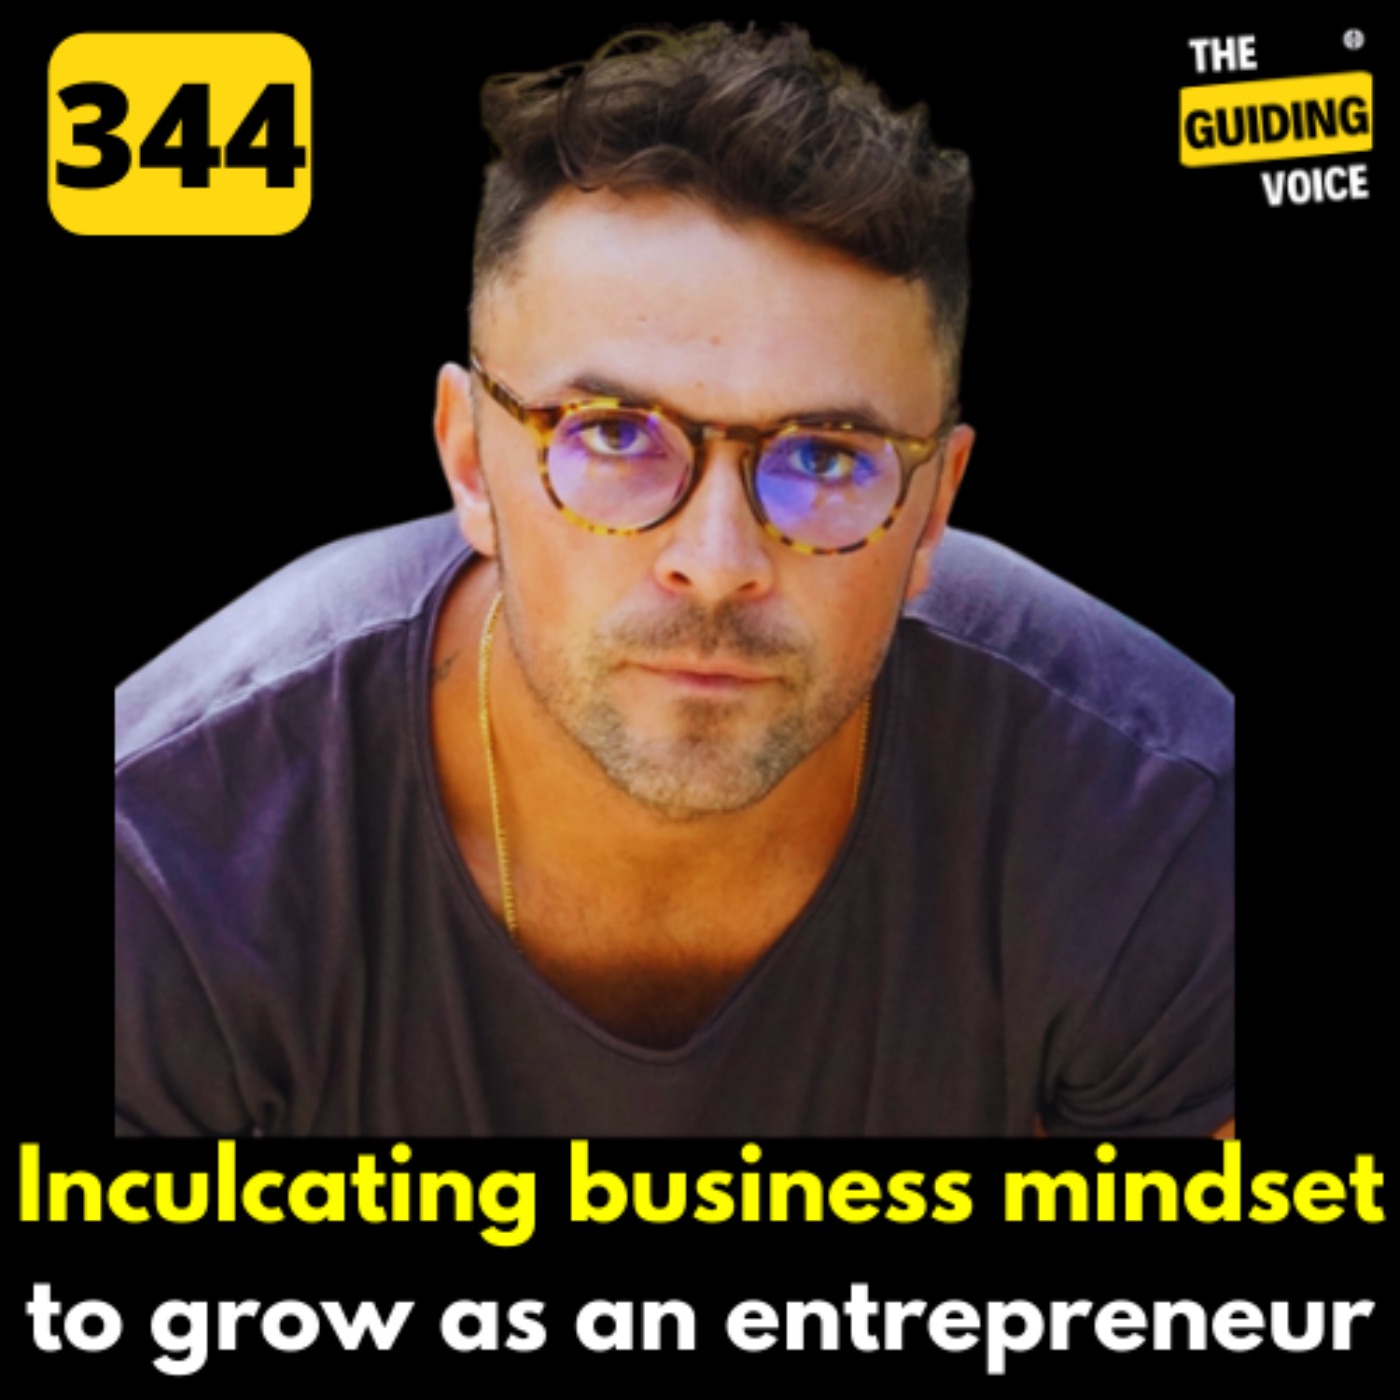 HOW TO INCULCATE BUSINESS MINDSET AND GROW AS AN ENTREPRENEUR? WILL BASTA | #TGV344